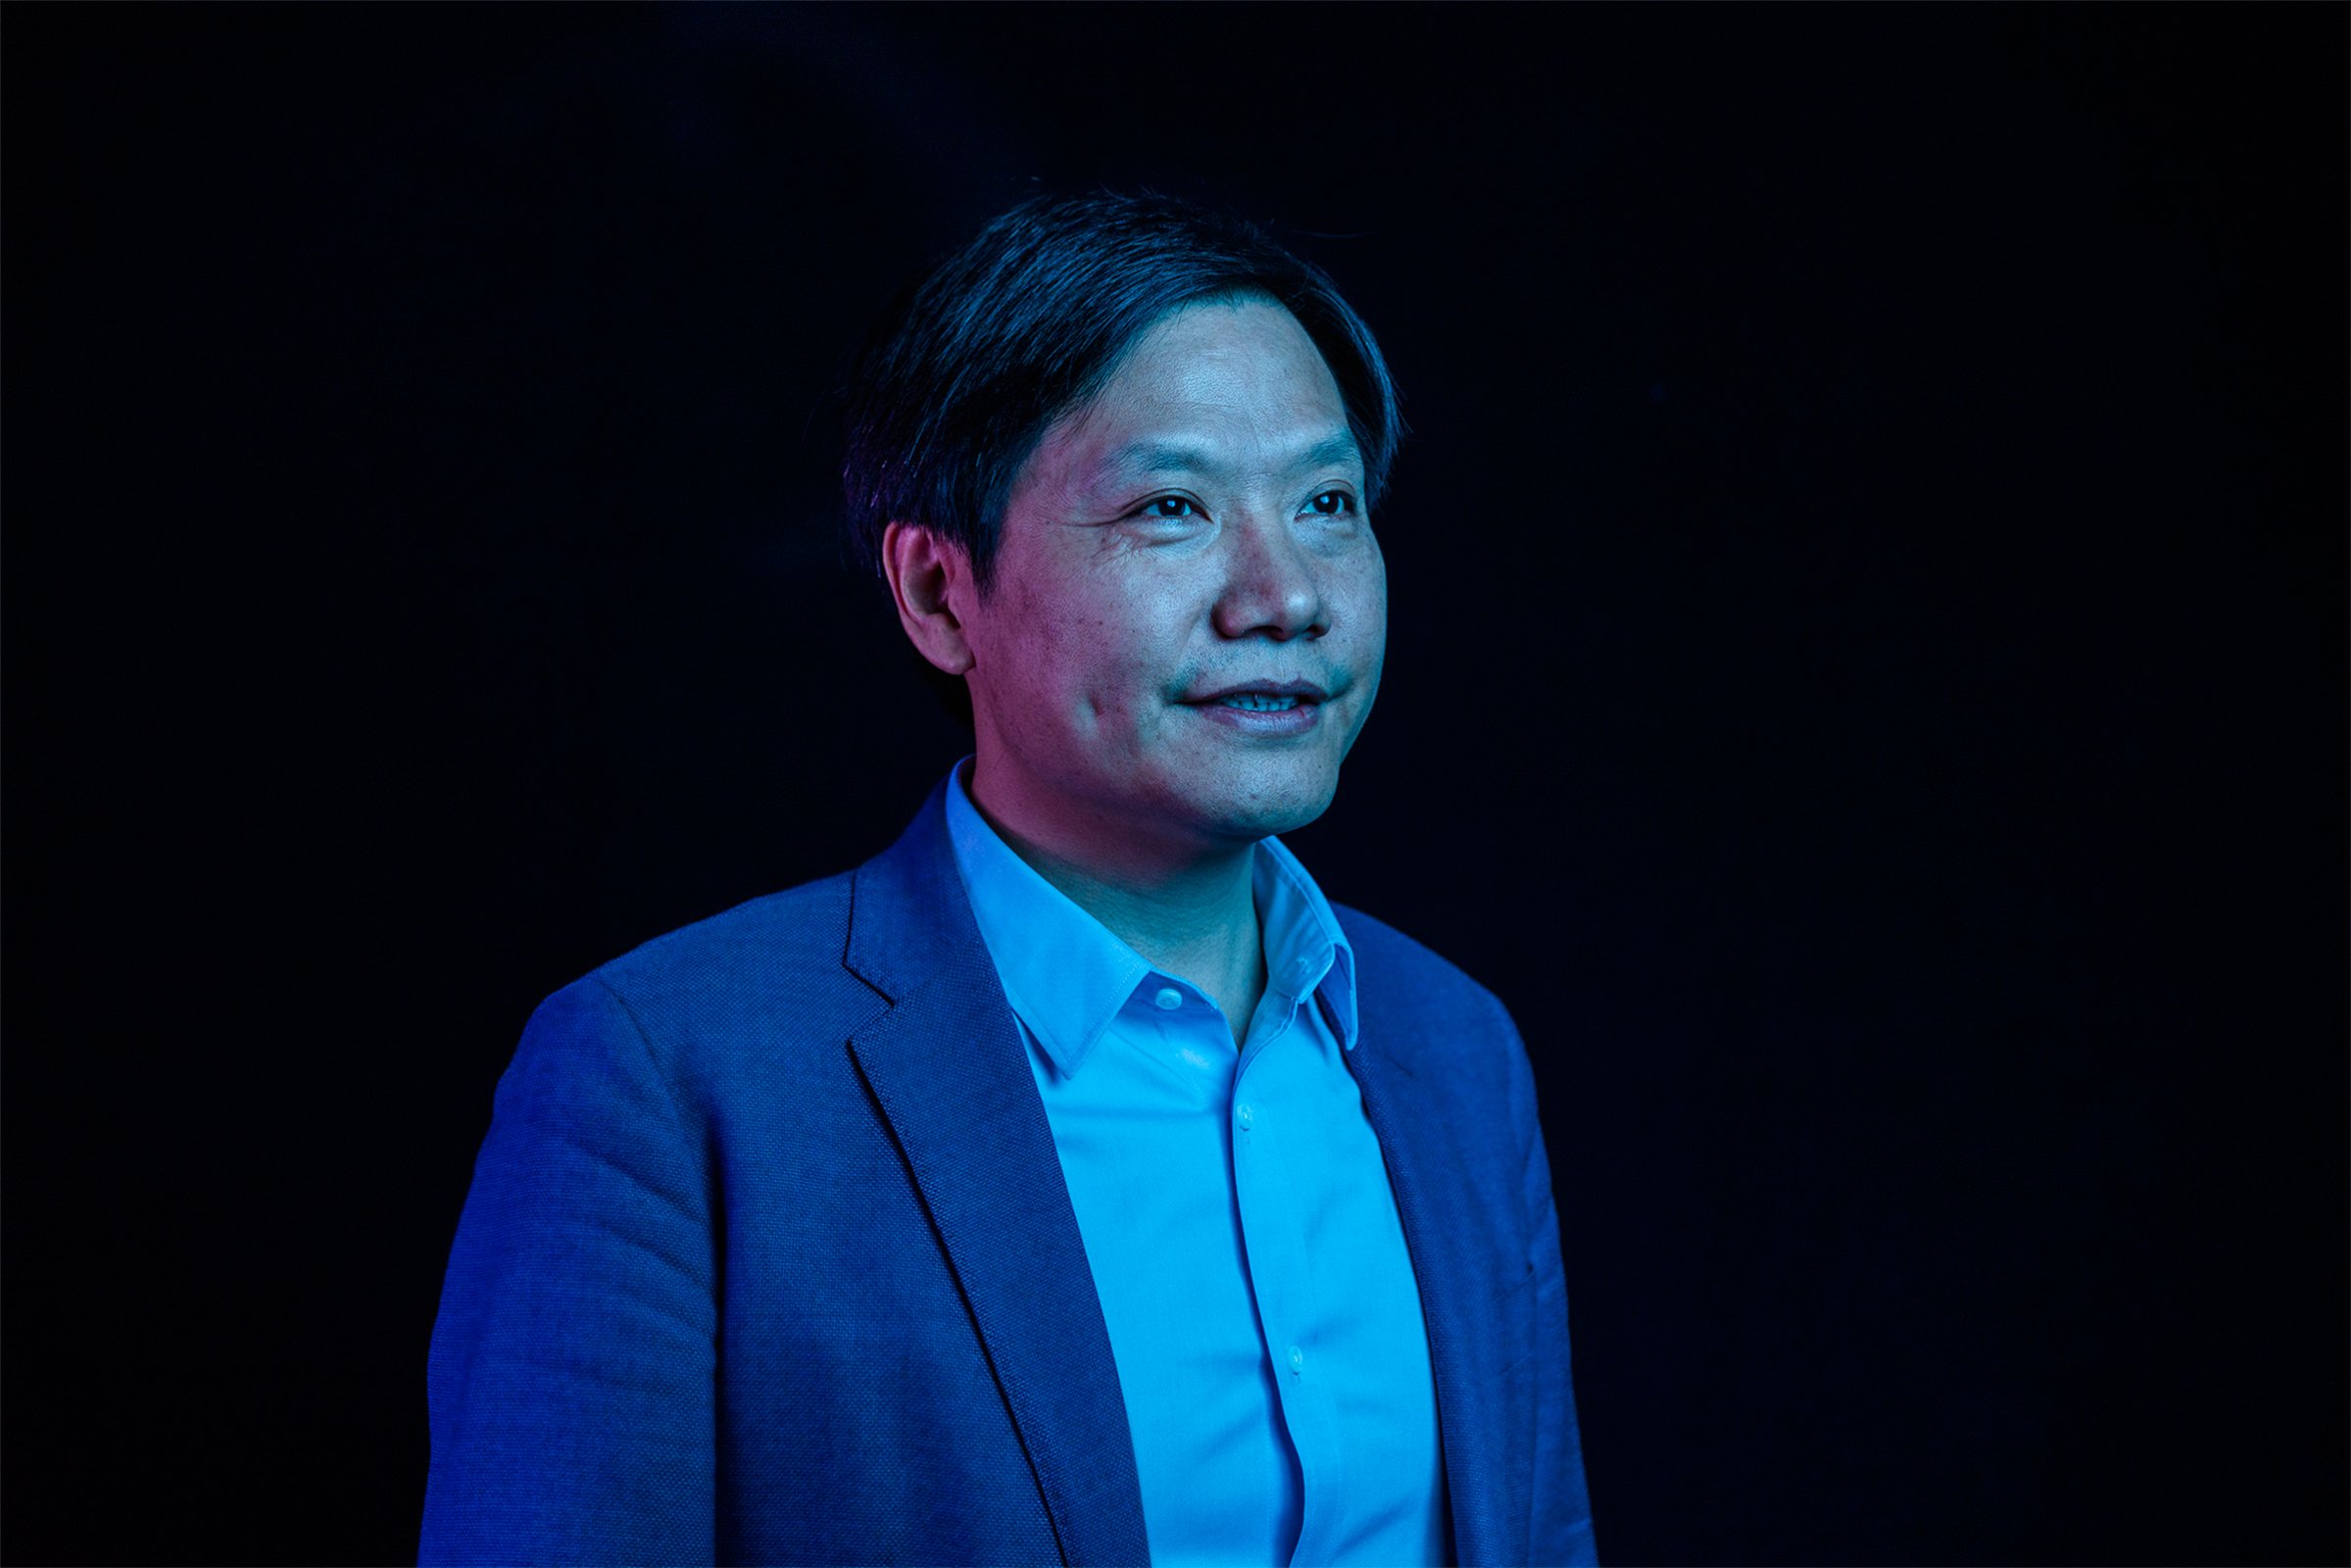 Lei Jun founder and CEO of Xiamoi